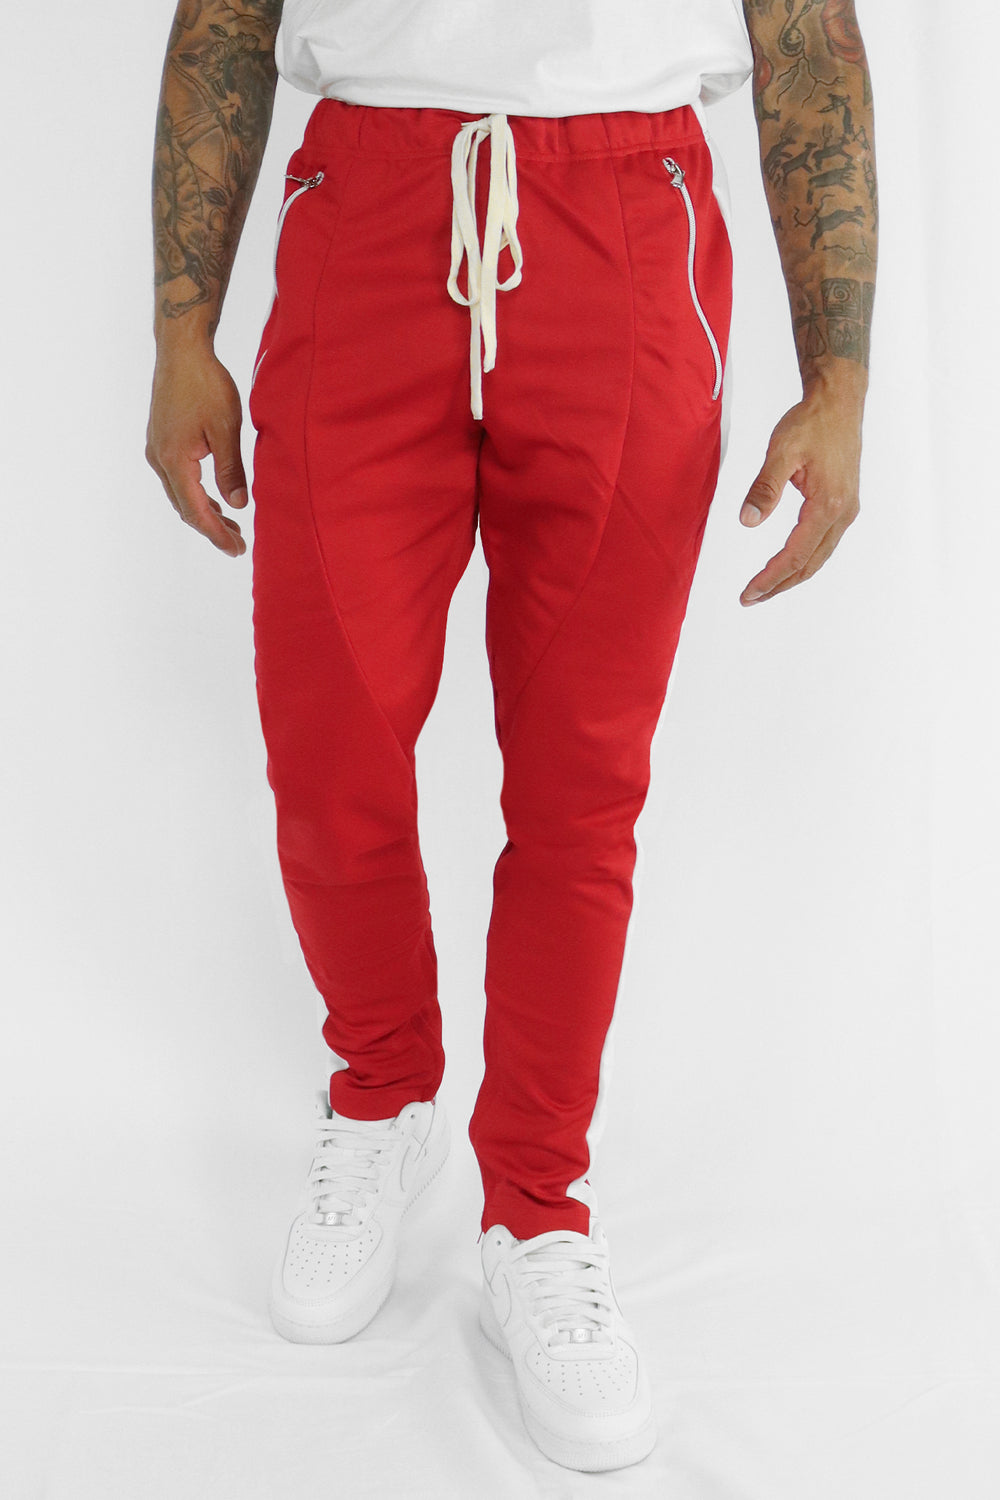 Women Track Pants Manufacturer / Women Track Pants Exporters Suppliers  17130844 - Wholesale Manufacturers and Exporters